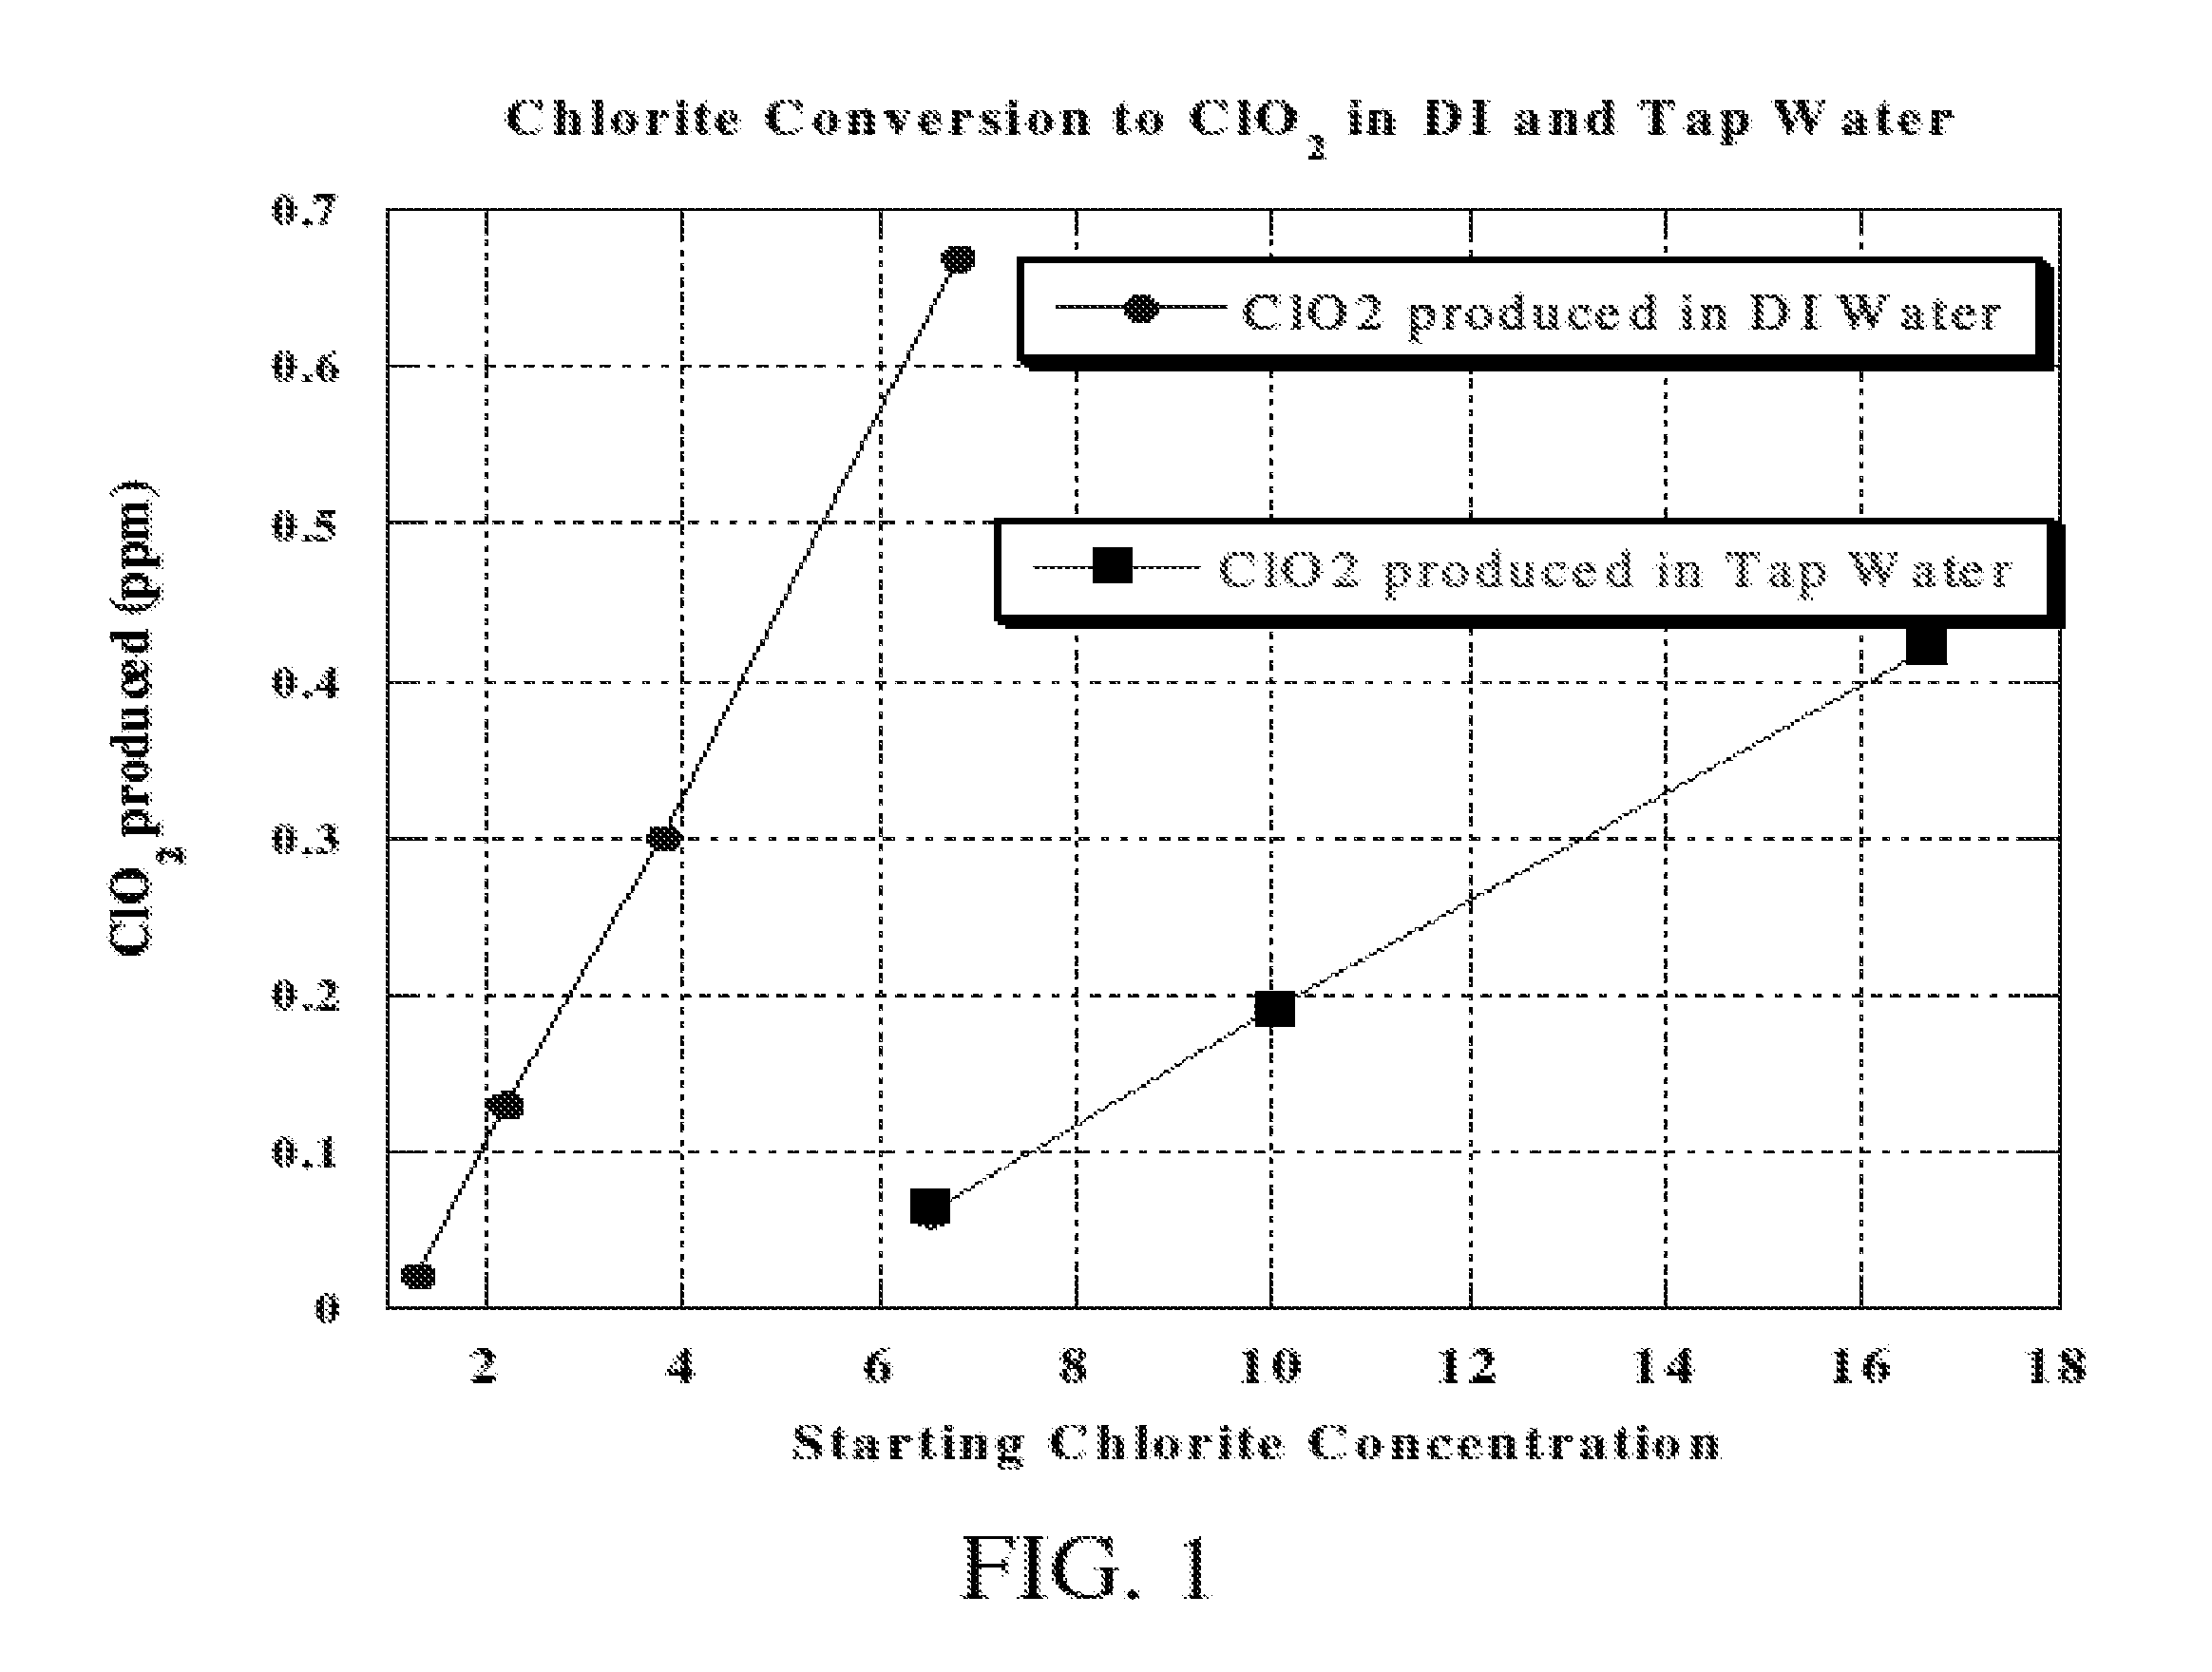 Method and apparatus for the continous production of low concentrations of chlorine dioxide from low concentrations of aqueous chlorite